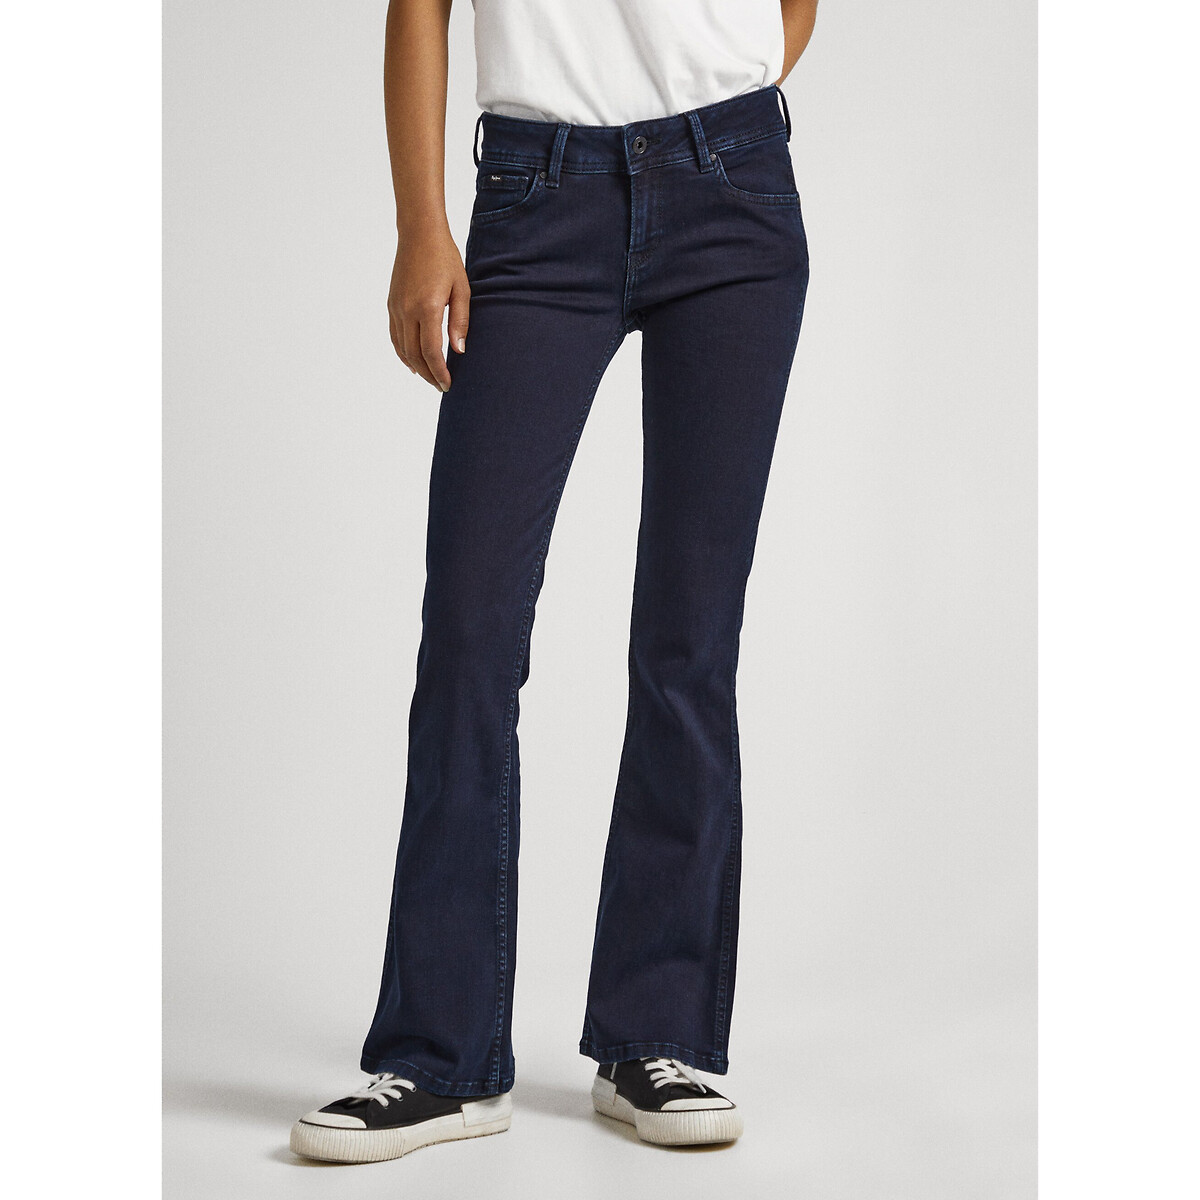 Pepe jeans Jeans Flare New Pimlico